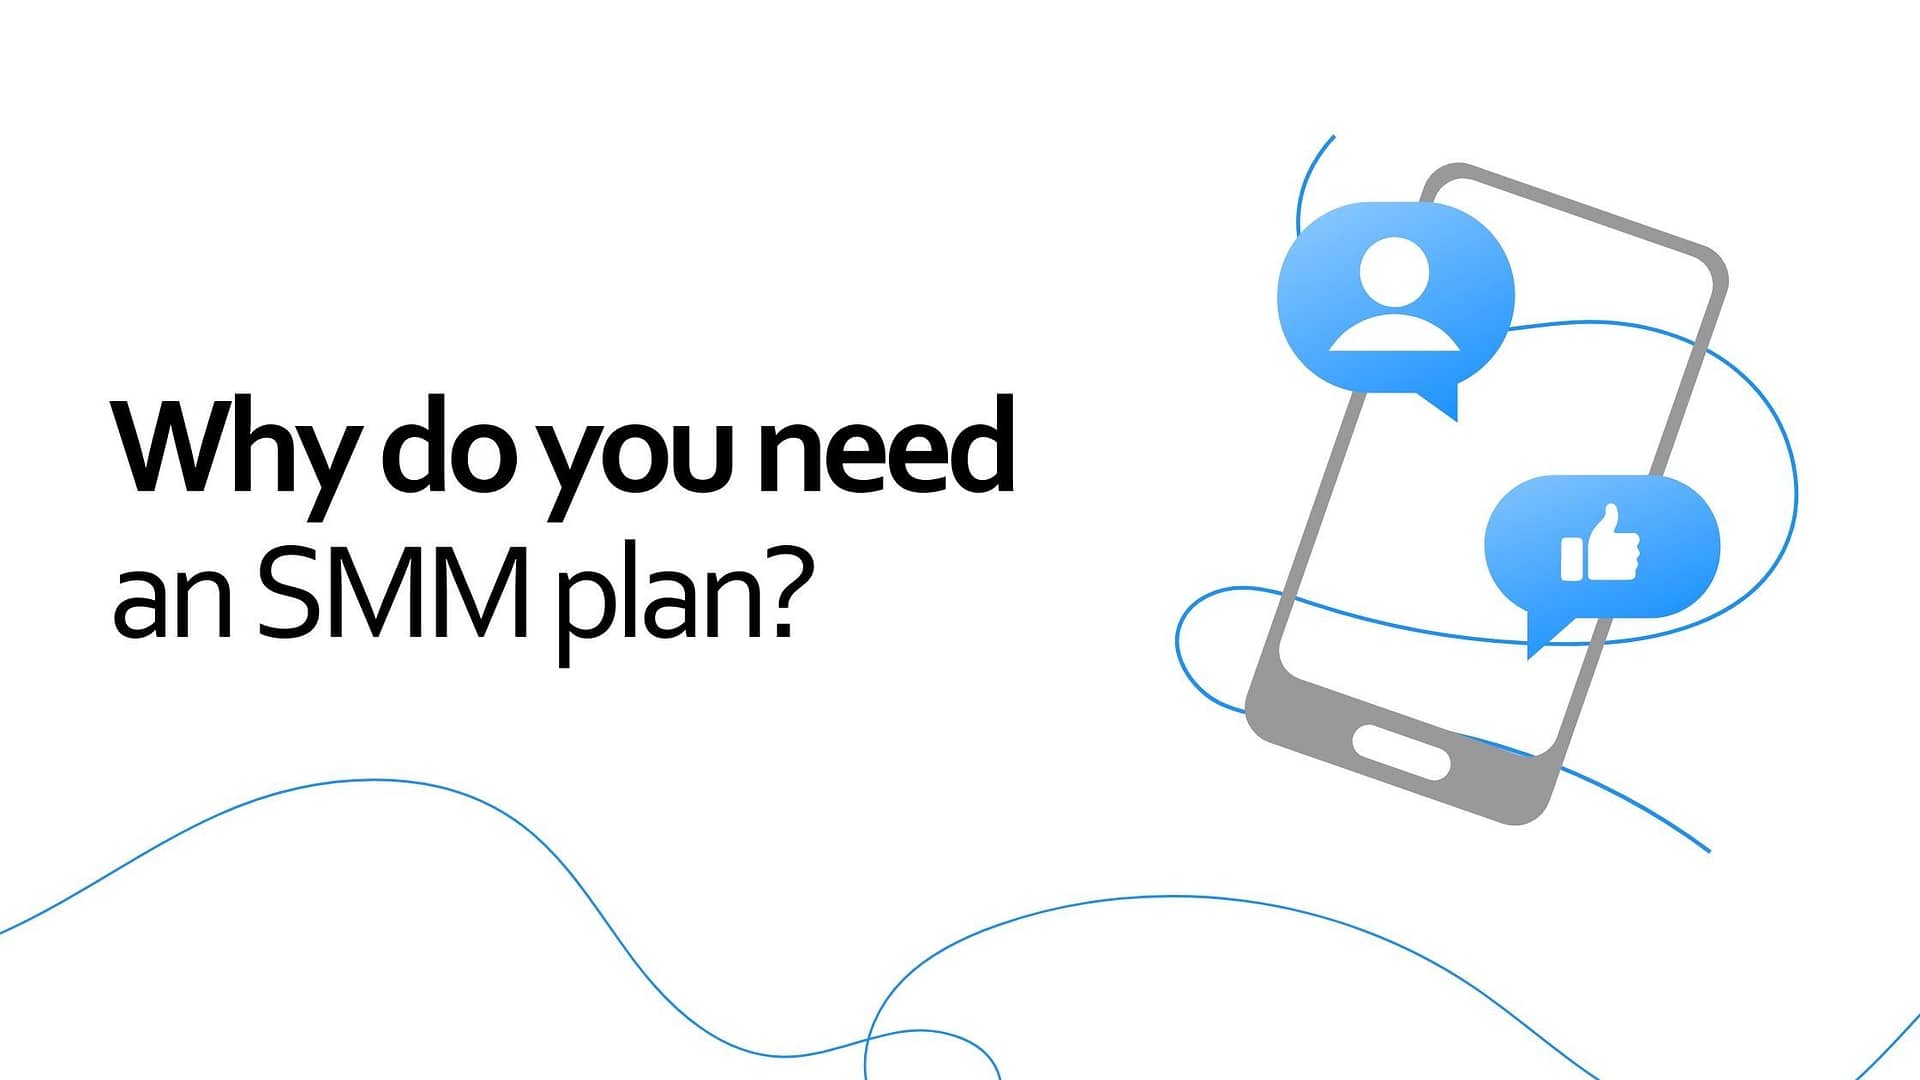 Why do you need an SMM plan?